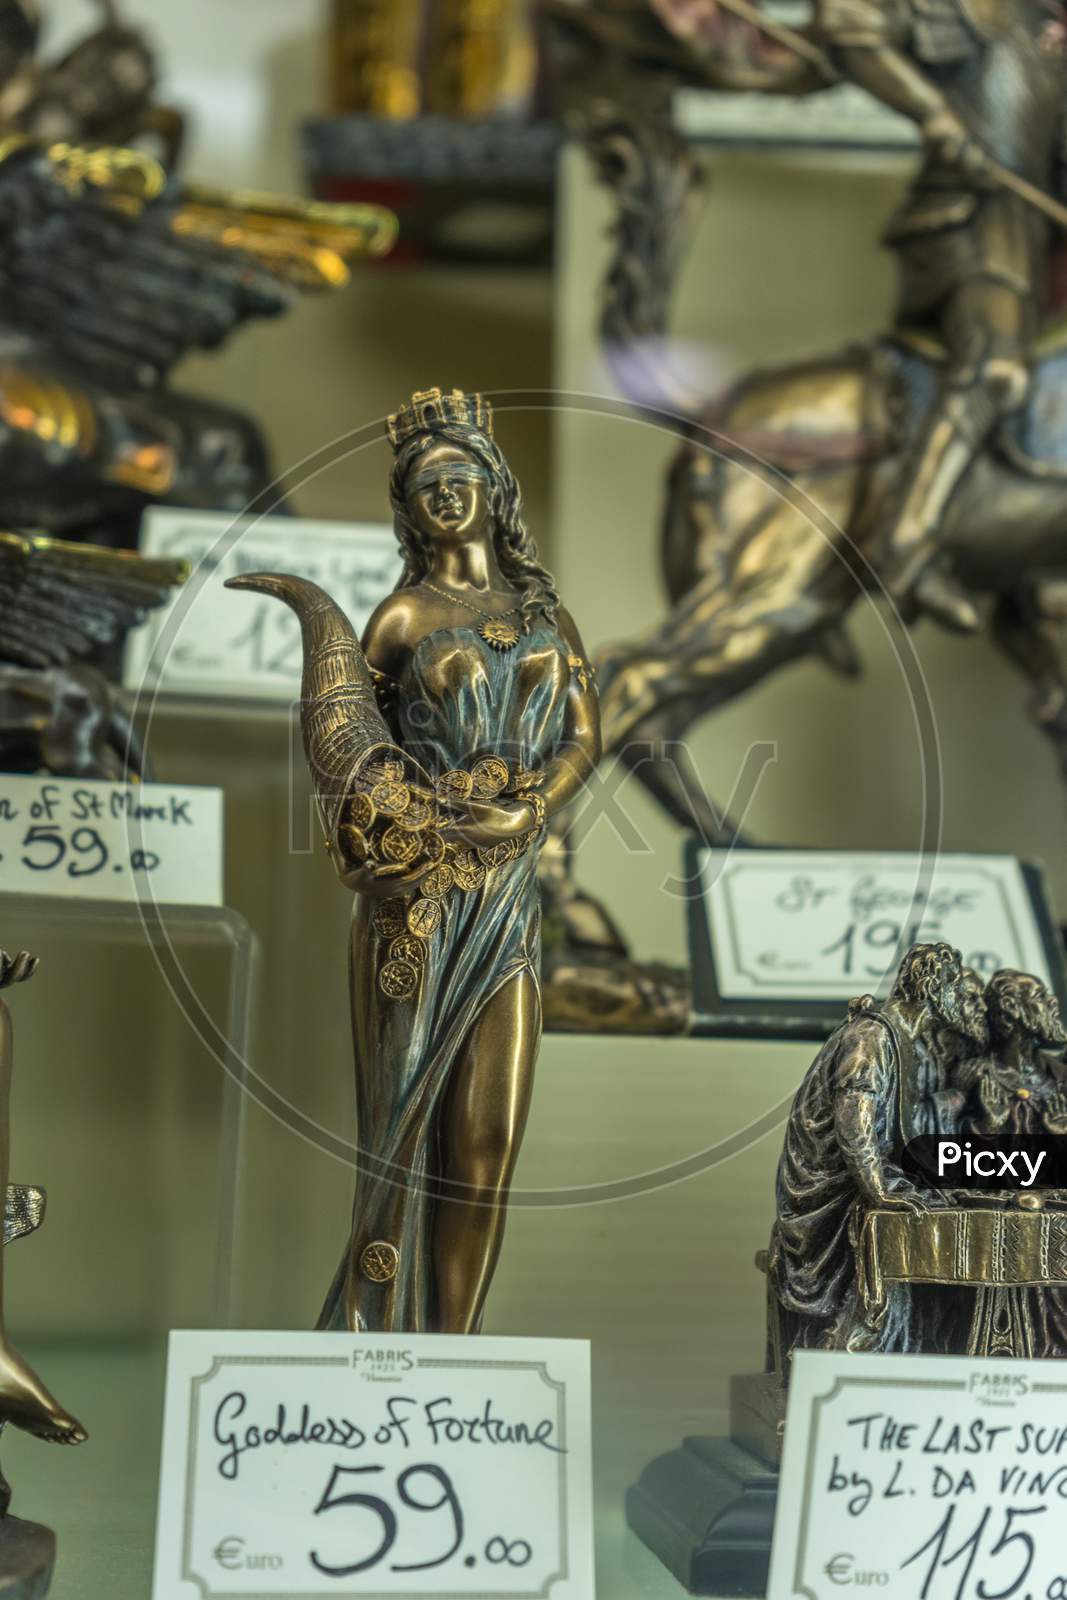 Venice, Italy - 30 June 2018: Fortune Goddess Artifacts On Display In A Shop In Venice, Italy